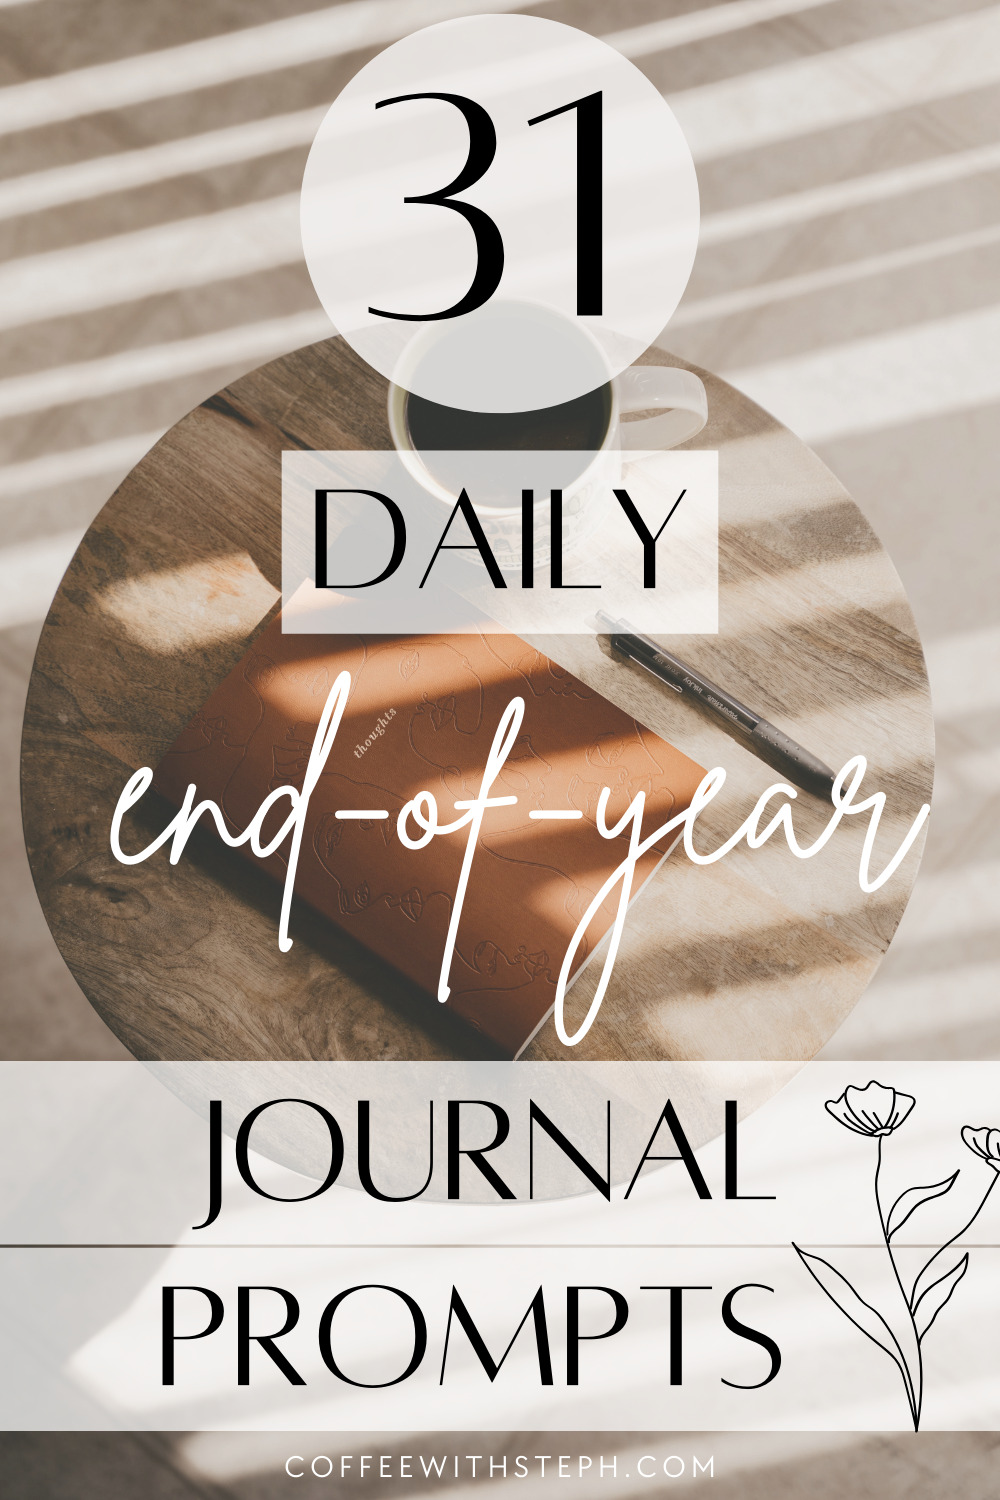 31 End of Year Journal Prompts for Reflection and Growth